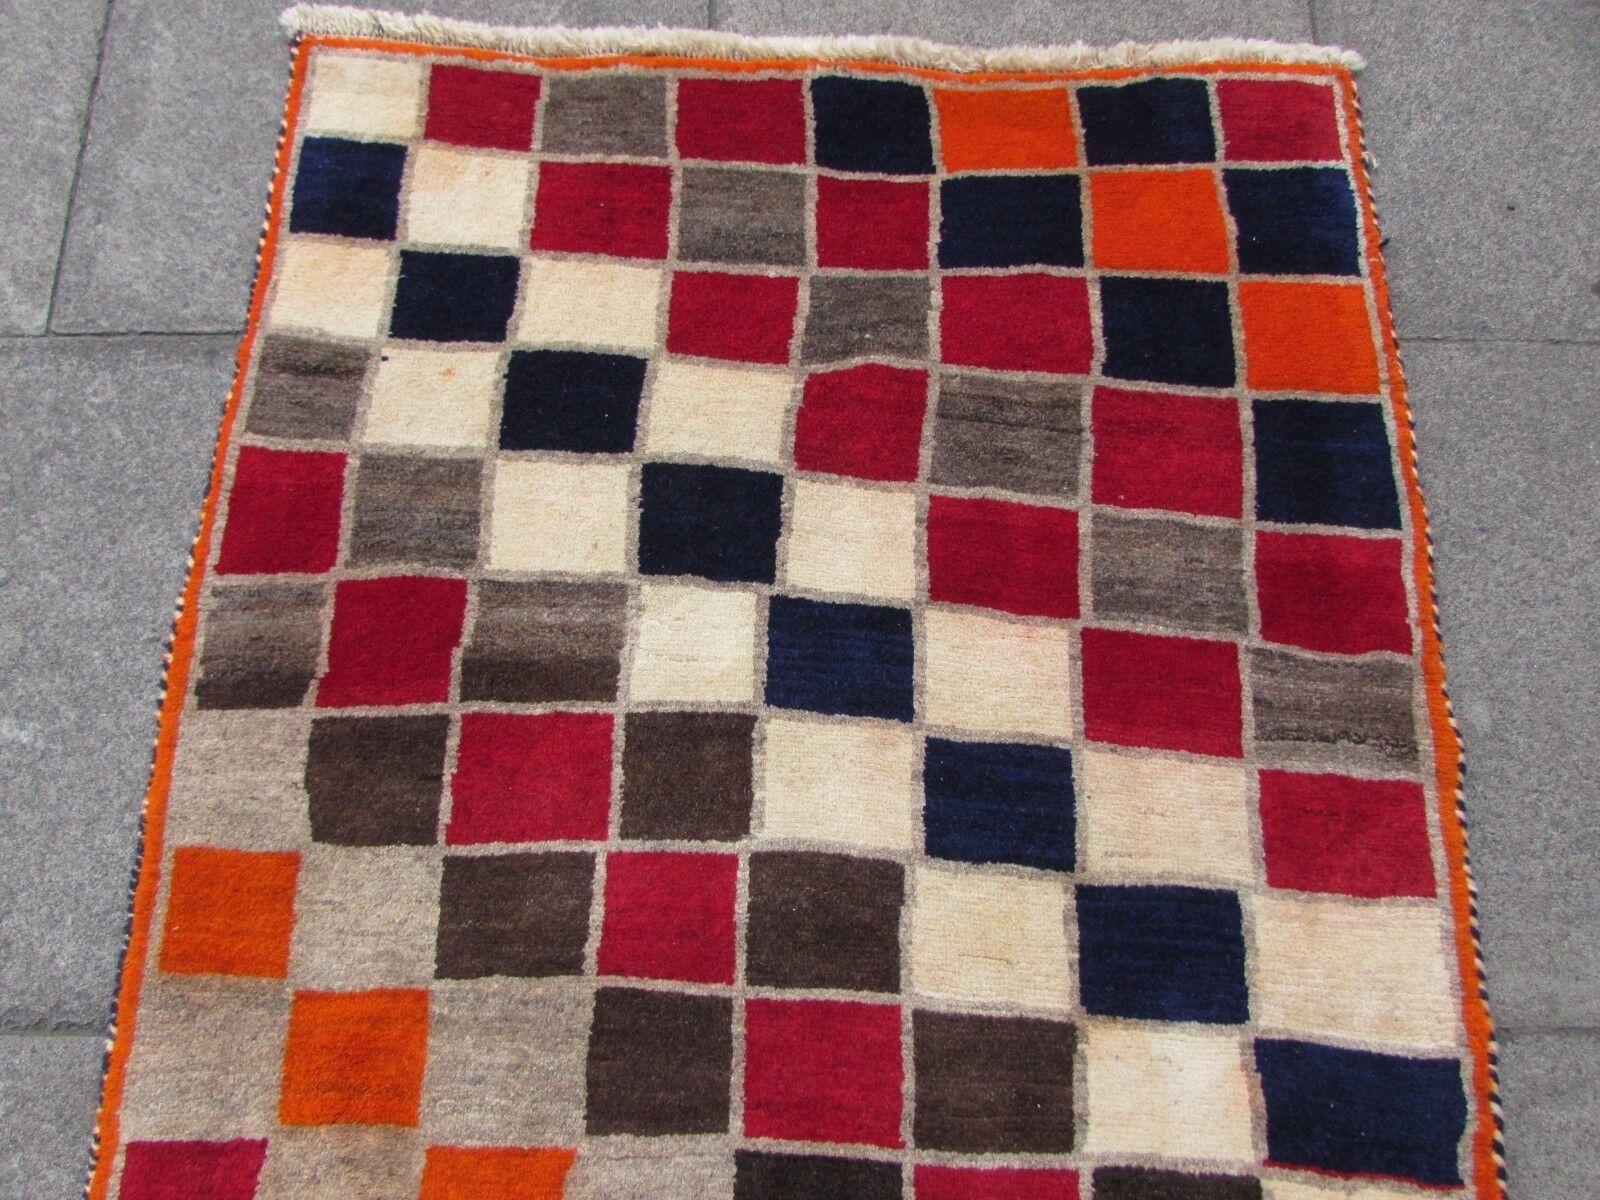 French Handmade Vintage Persian Style Gabbeh Rug 3.4' x 5.9', 1970s, 1Q44 For Sale